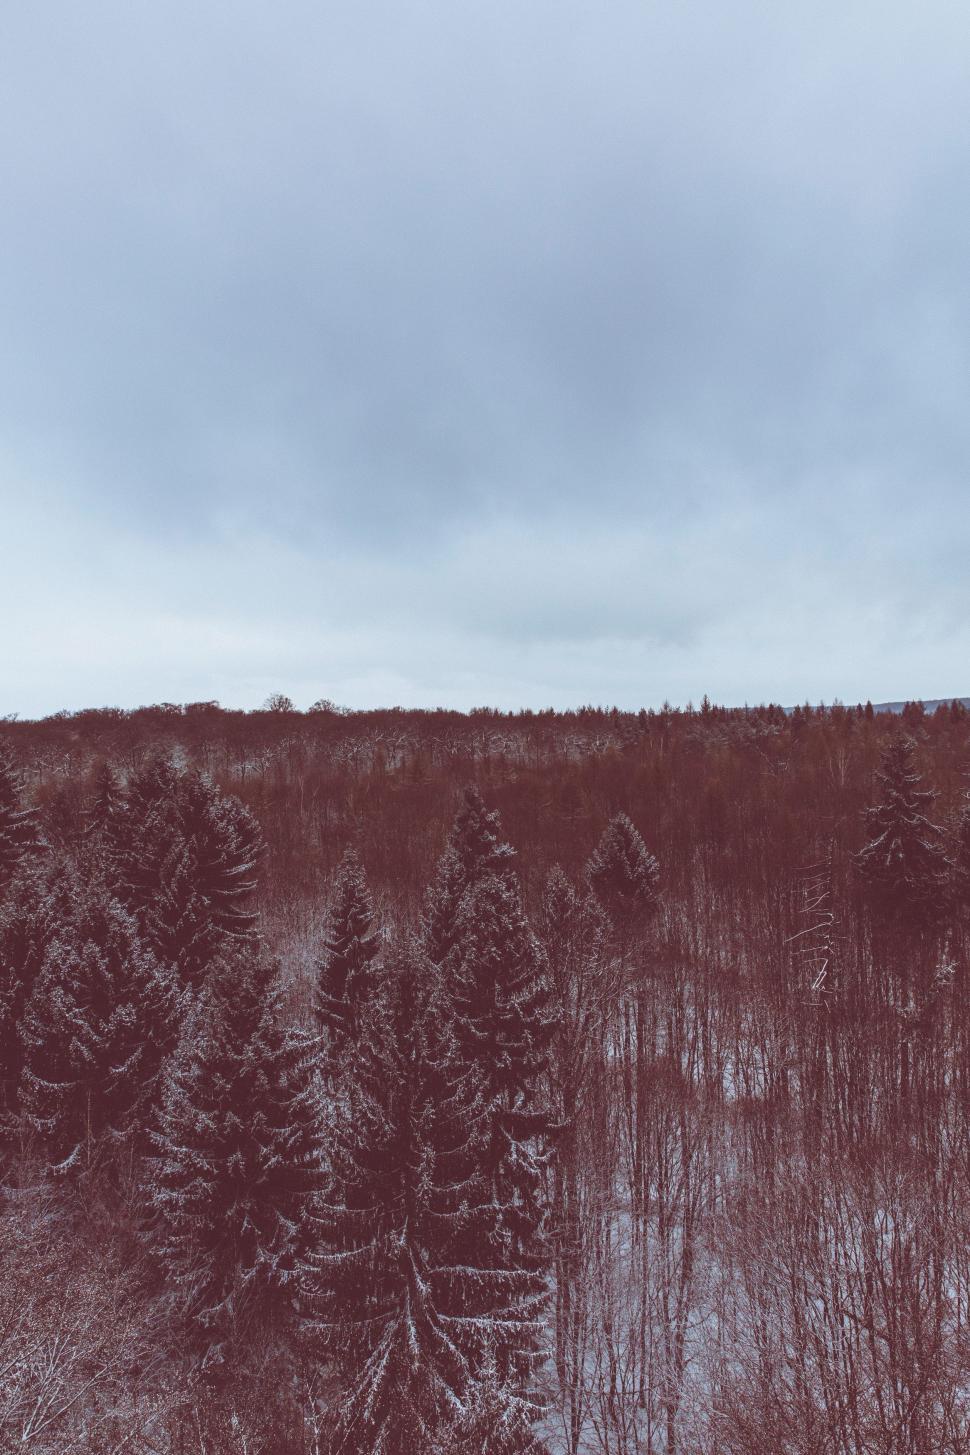 Free Image of Snow Covered Field With Trees in the Distance 